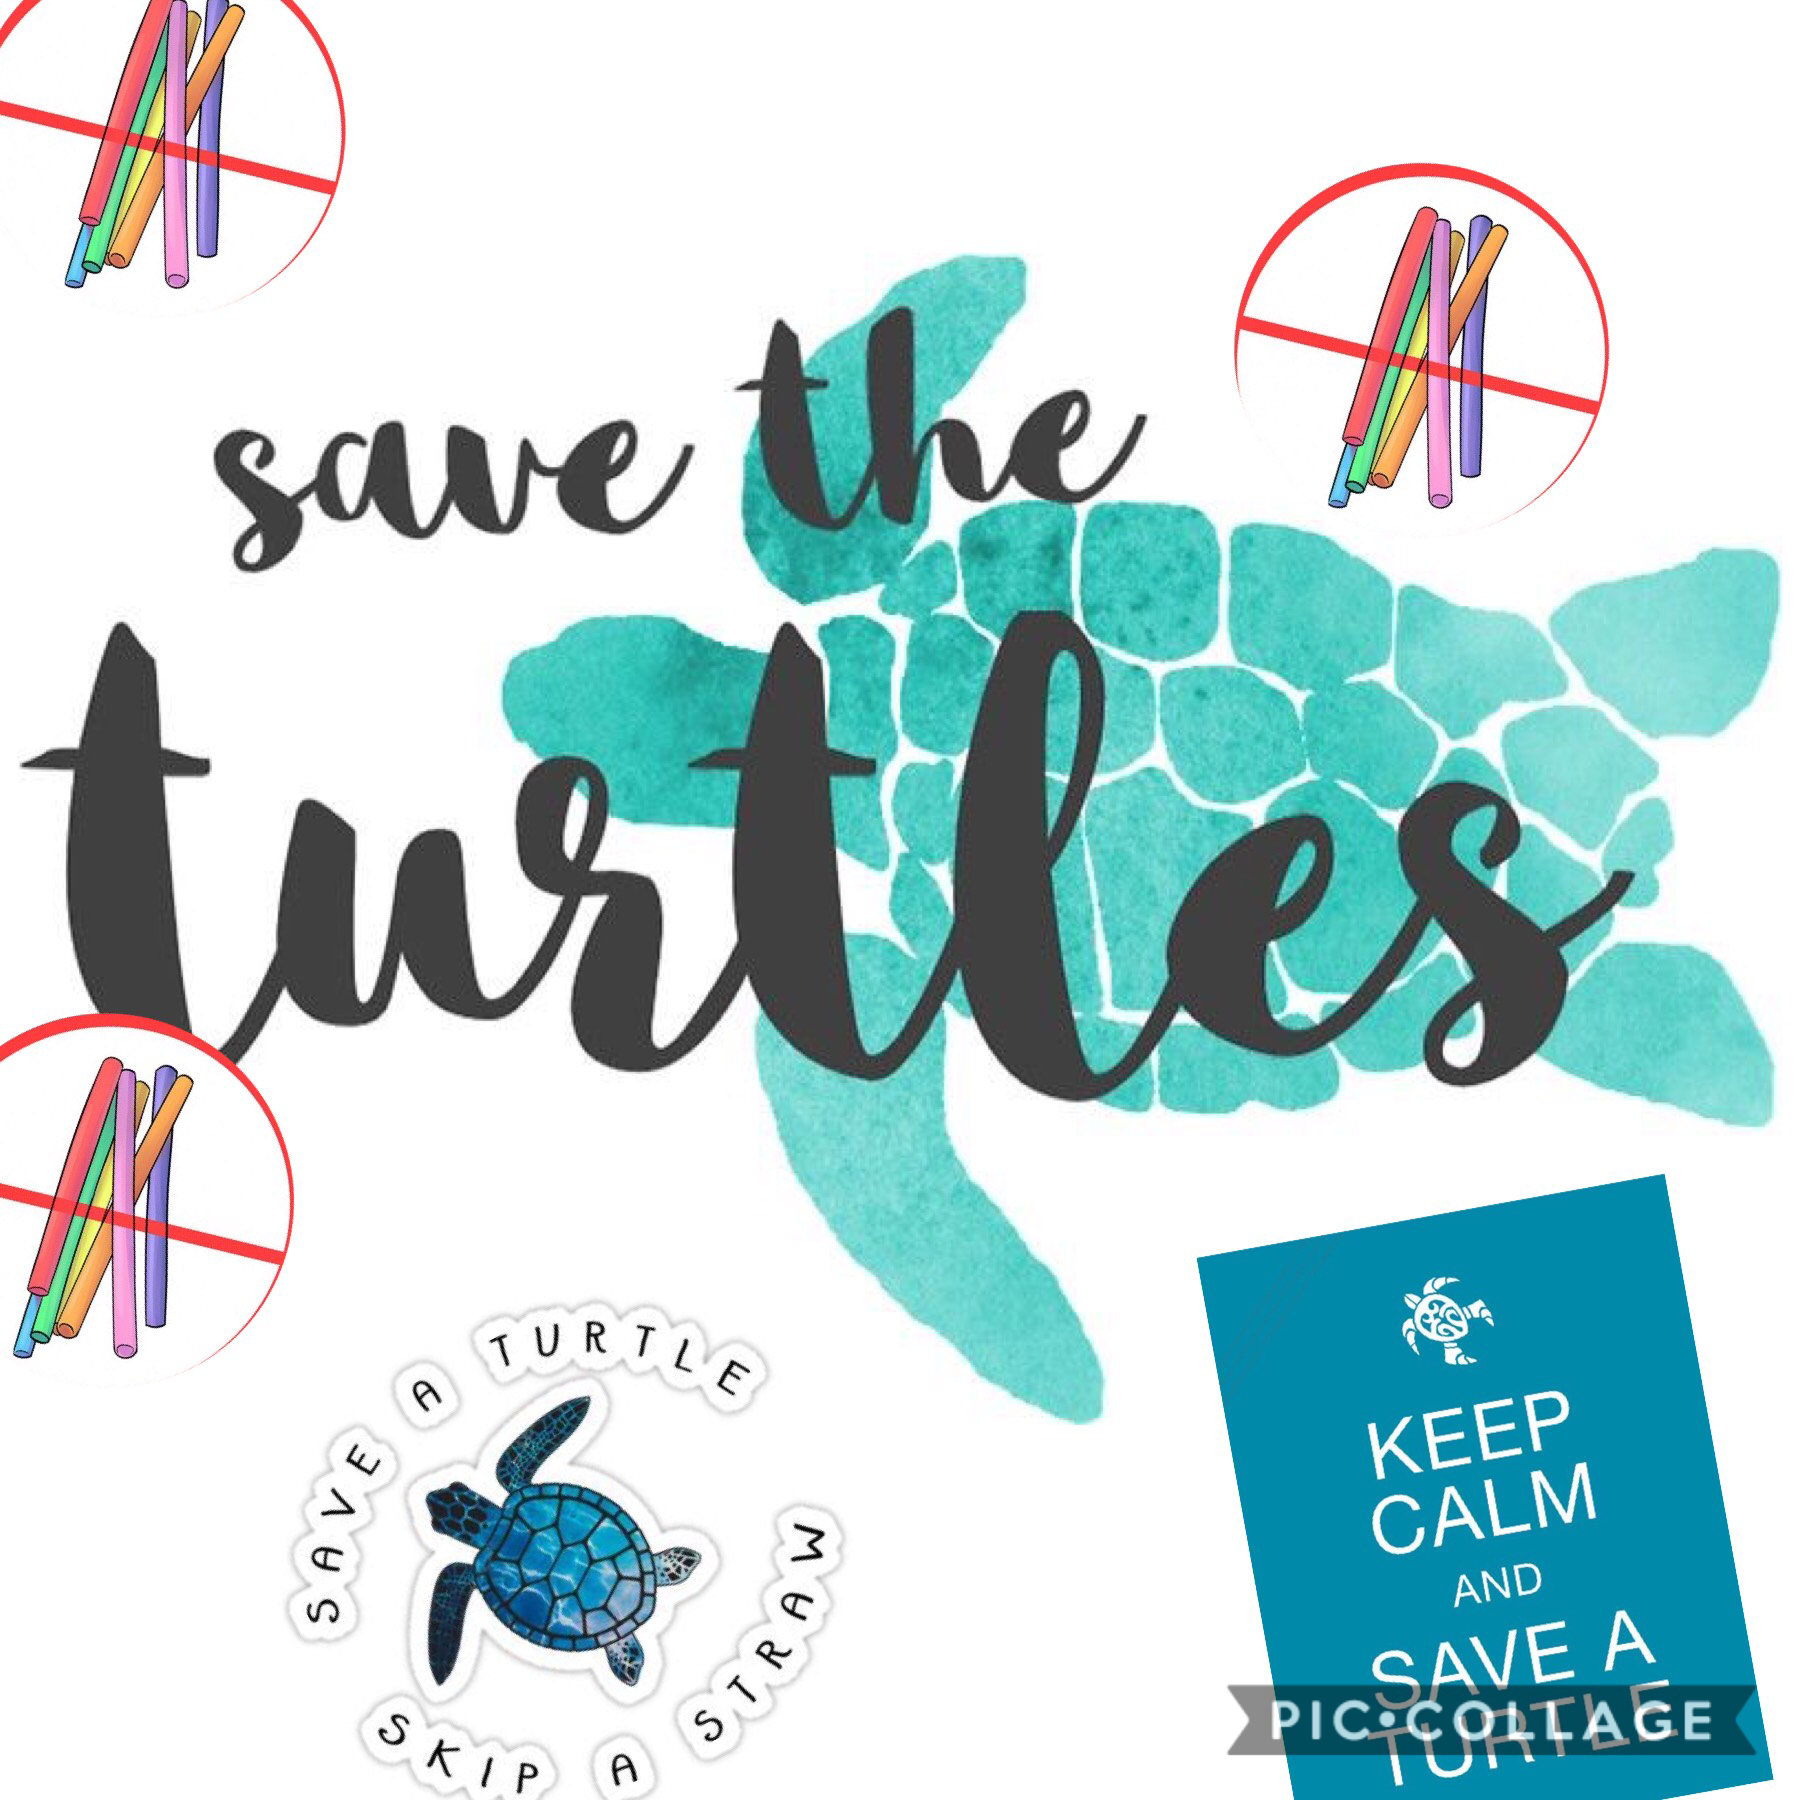 I know it’s not very neat but we all know we need to save the turtles